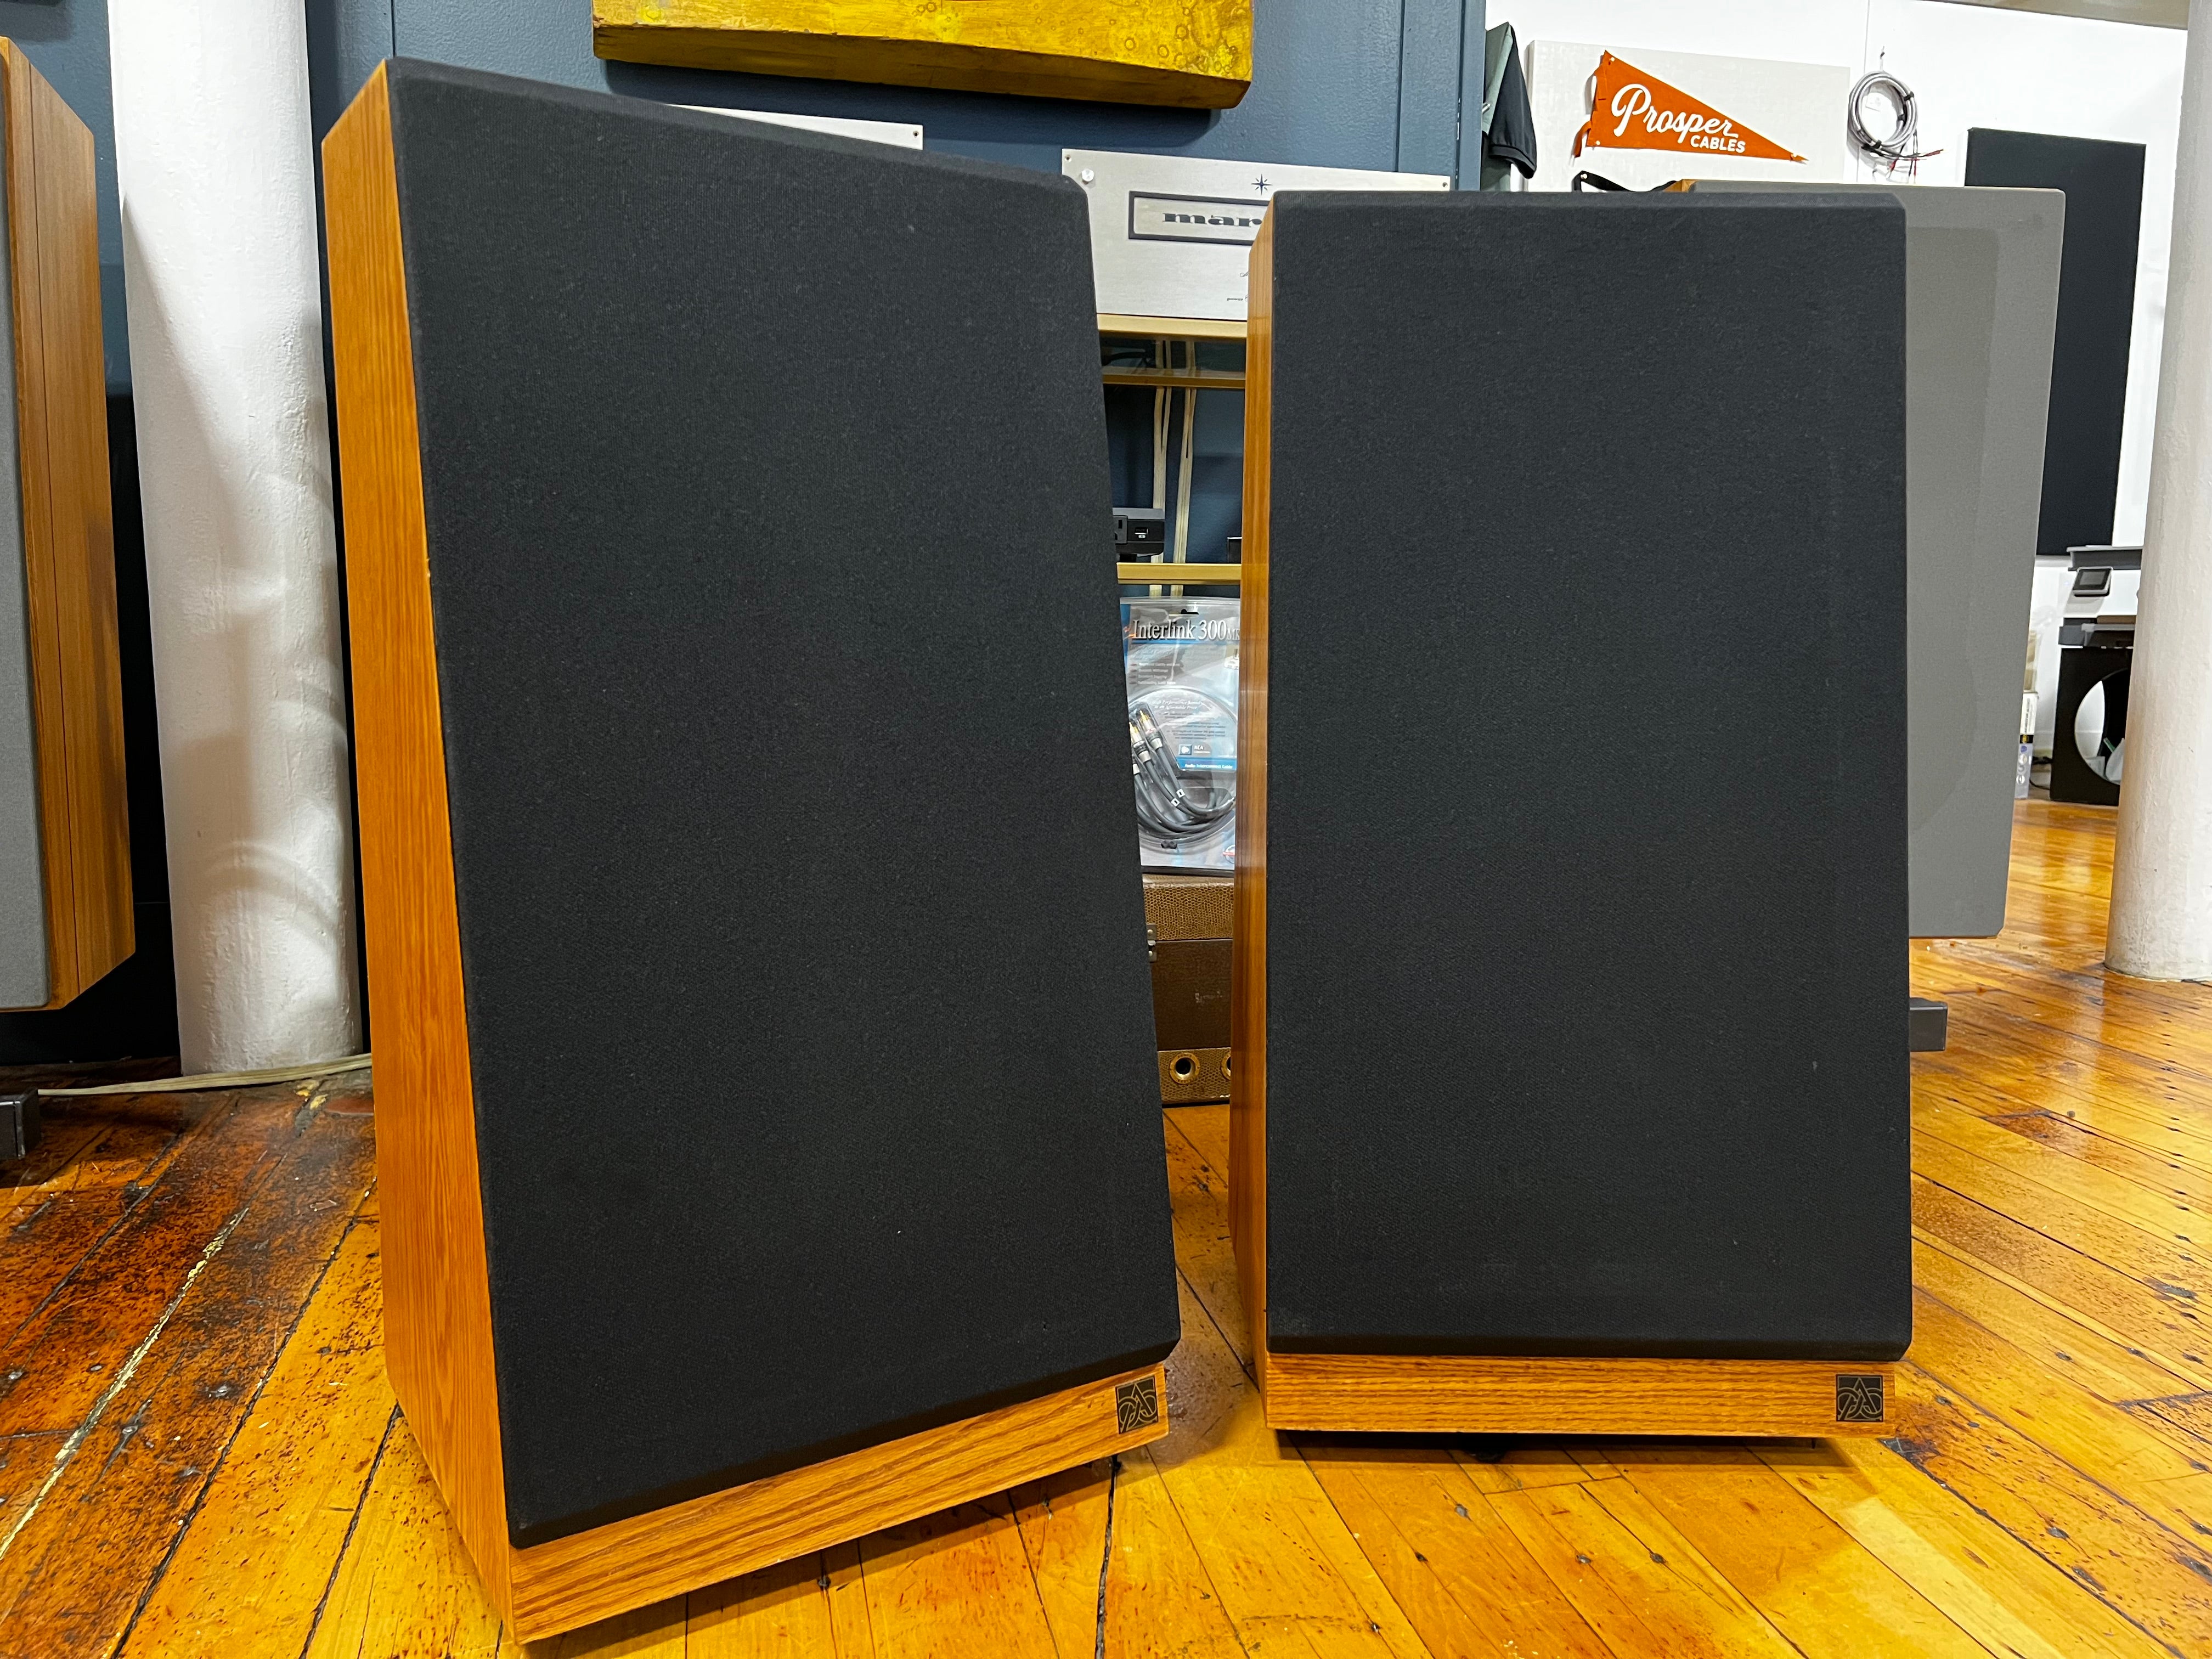 Audio Concepts, Inc. (ACI) G2 High Performance Speakers - SOLD